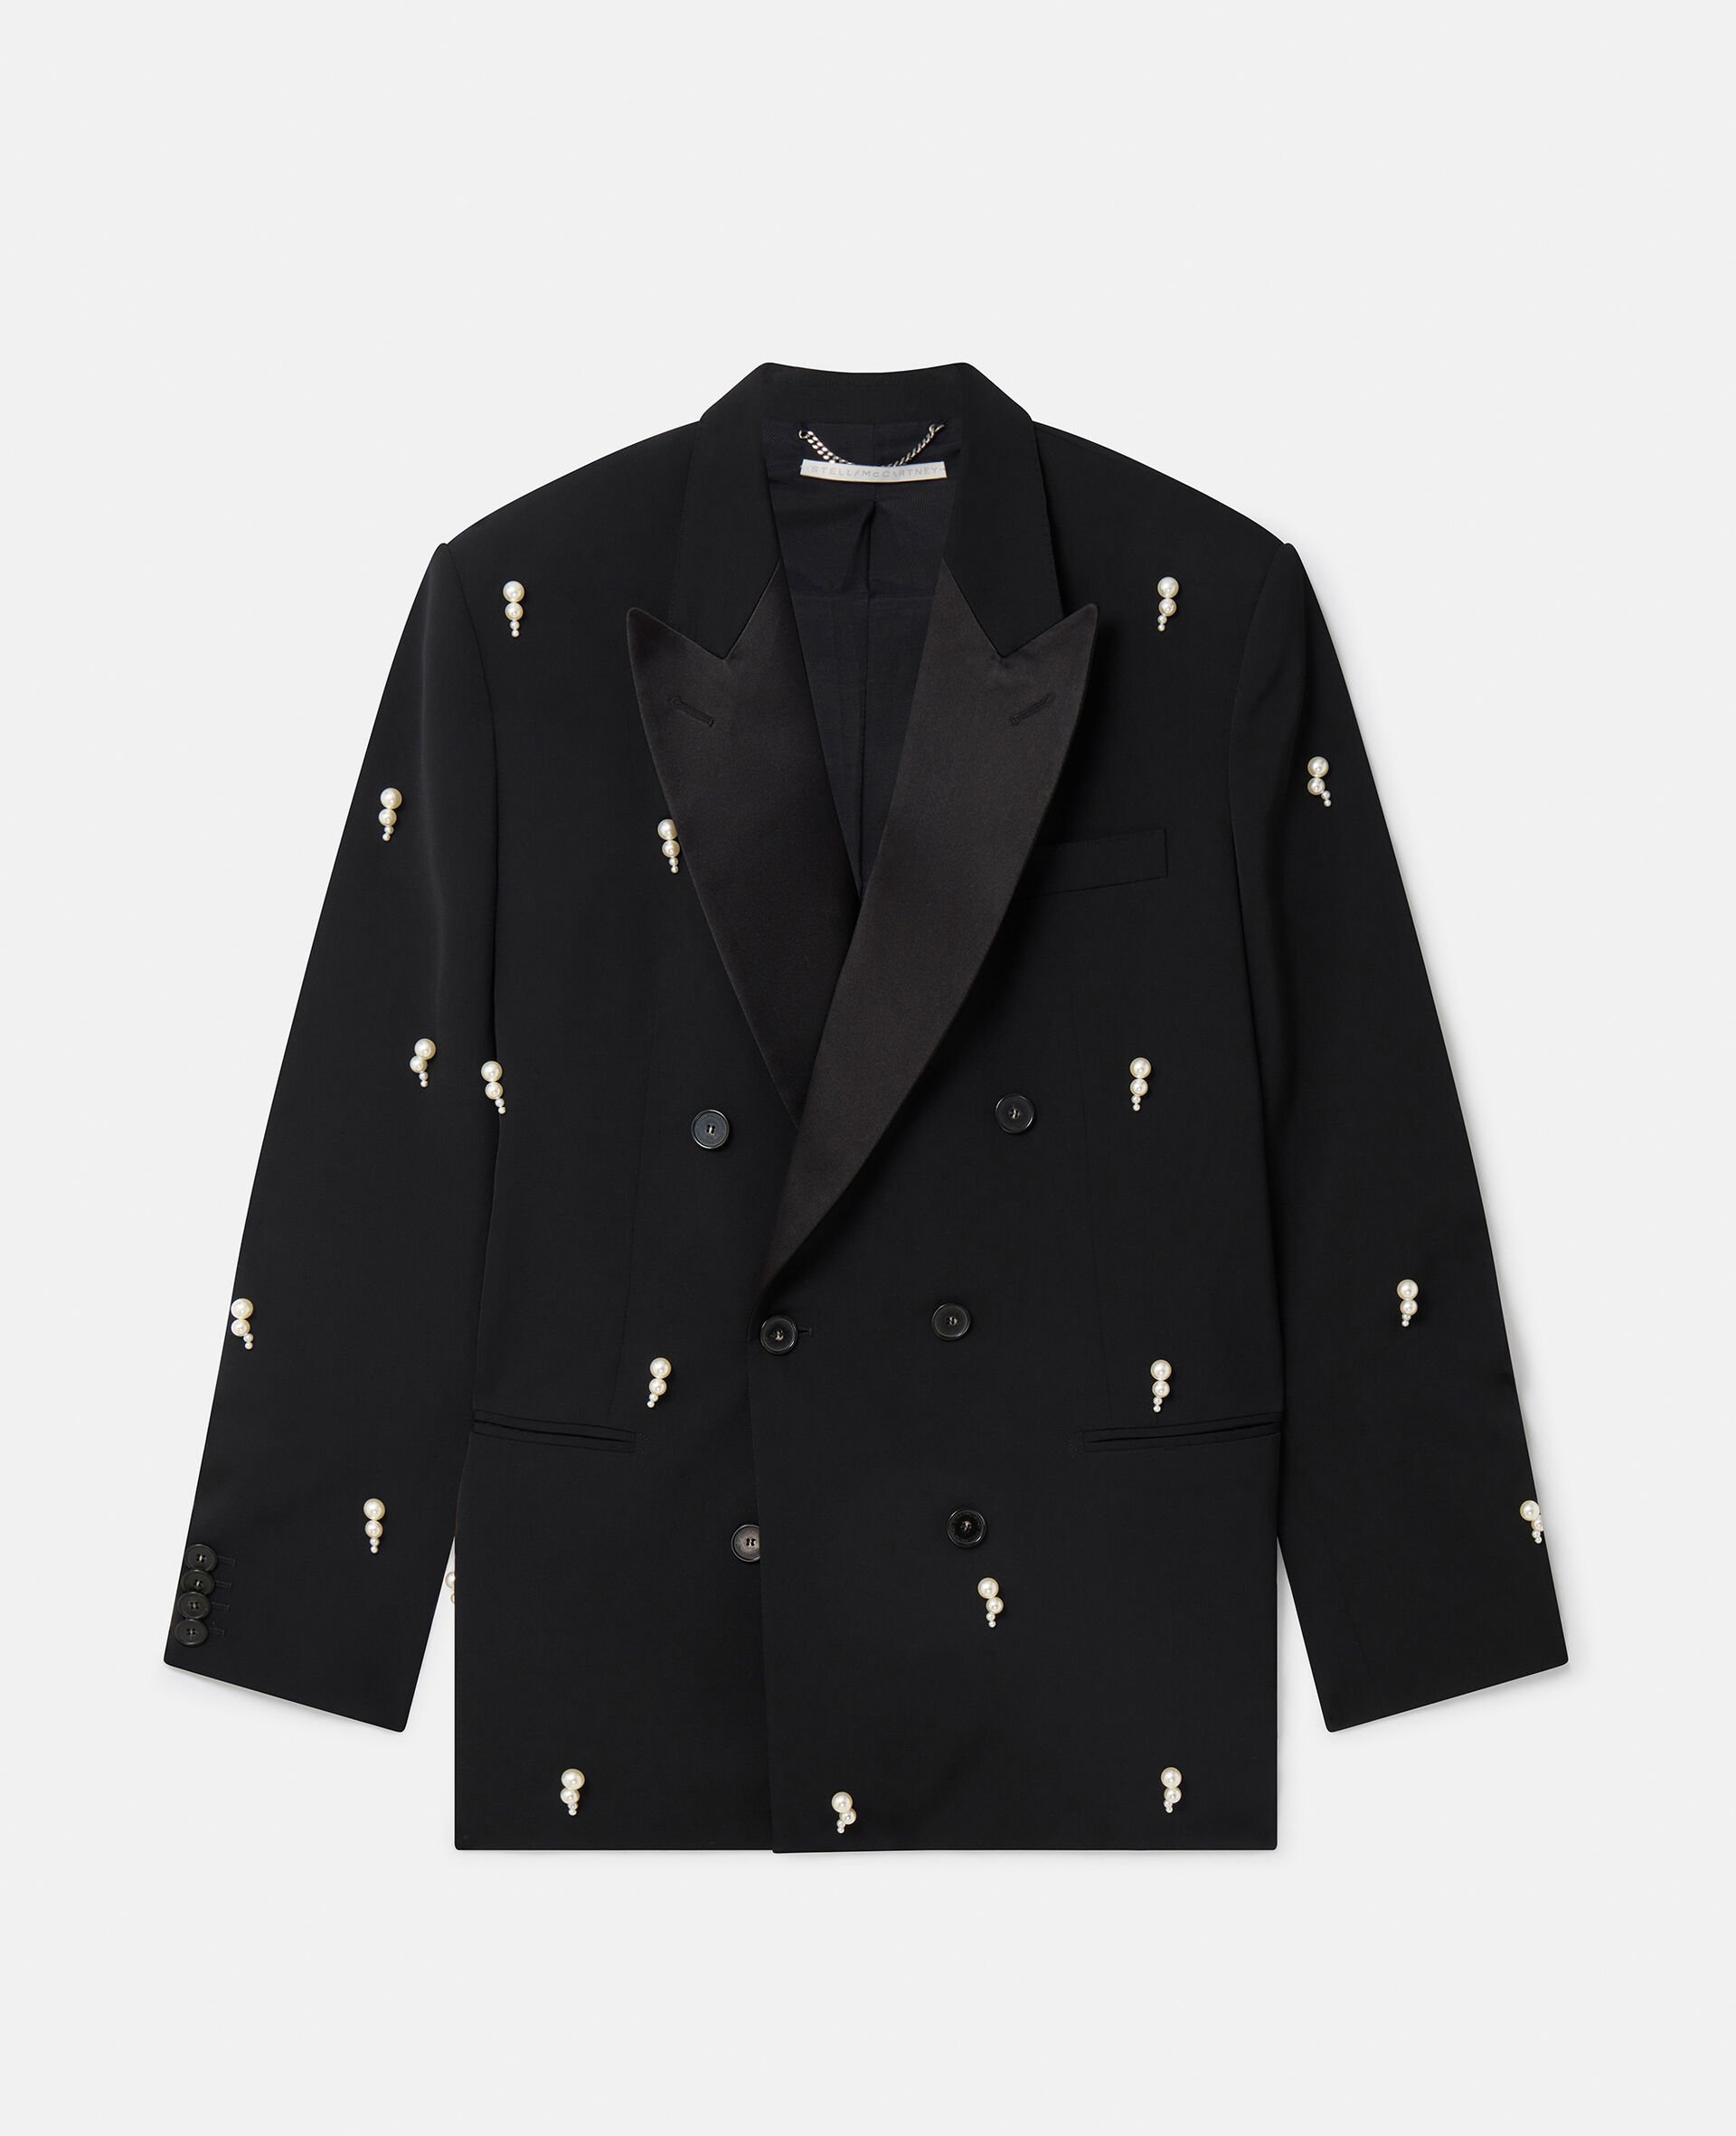 Pearl Embroidery Oversized Double-Breasted Blazer-Black-large image number 0